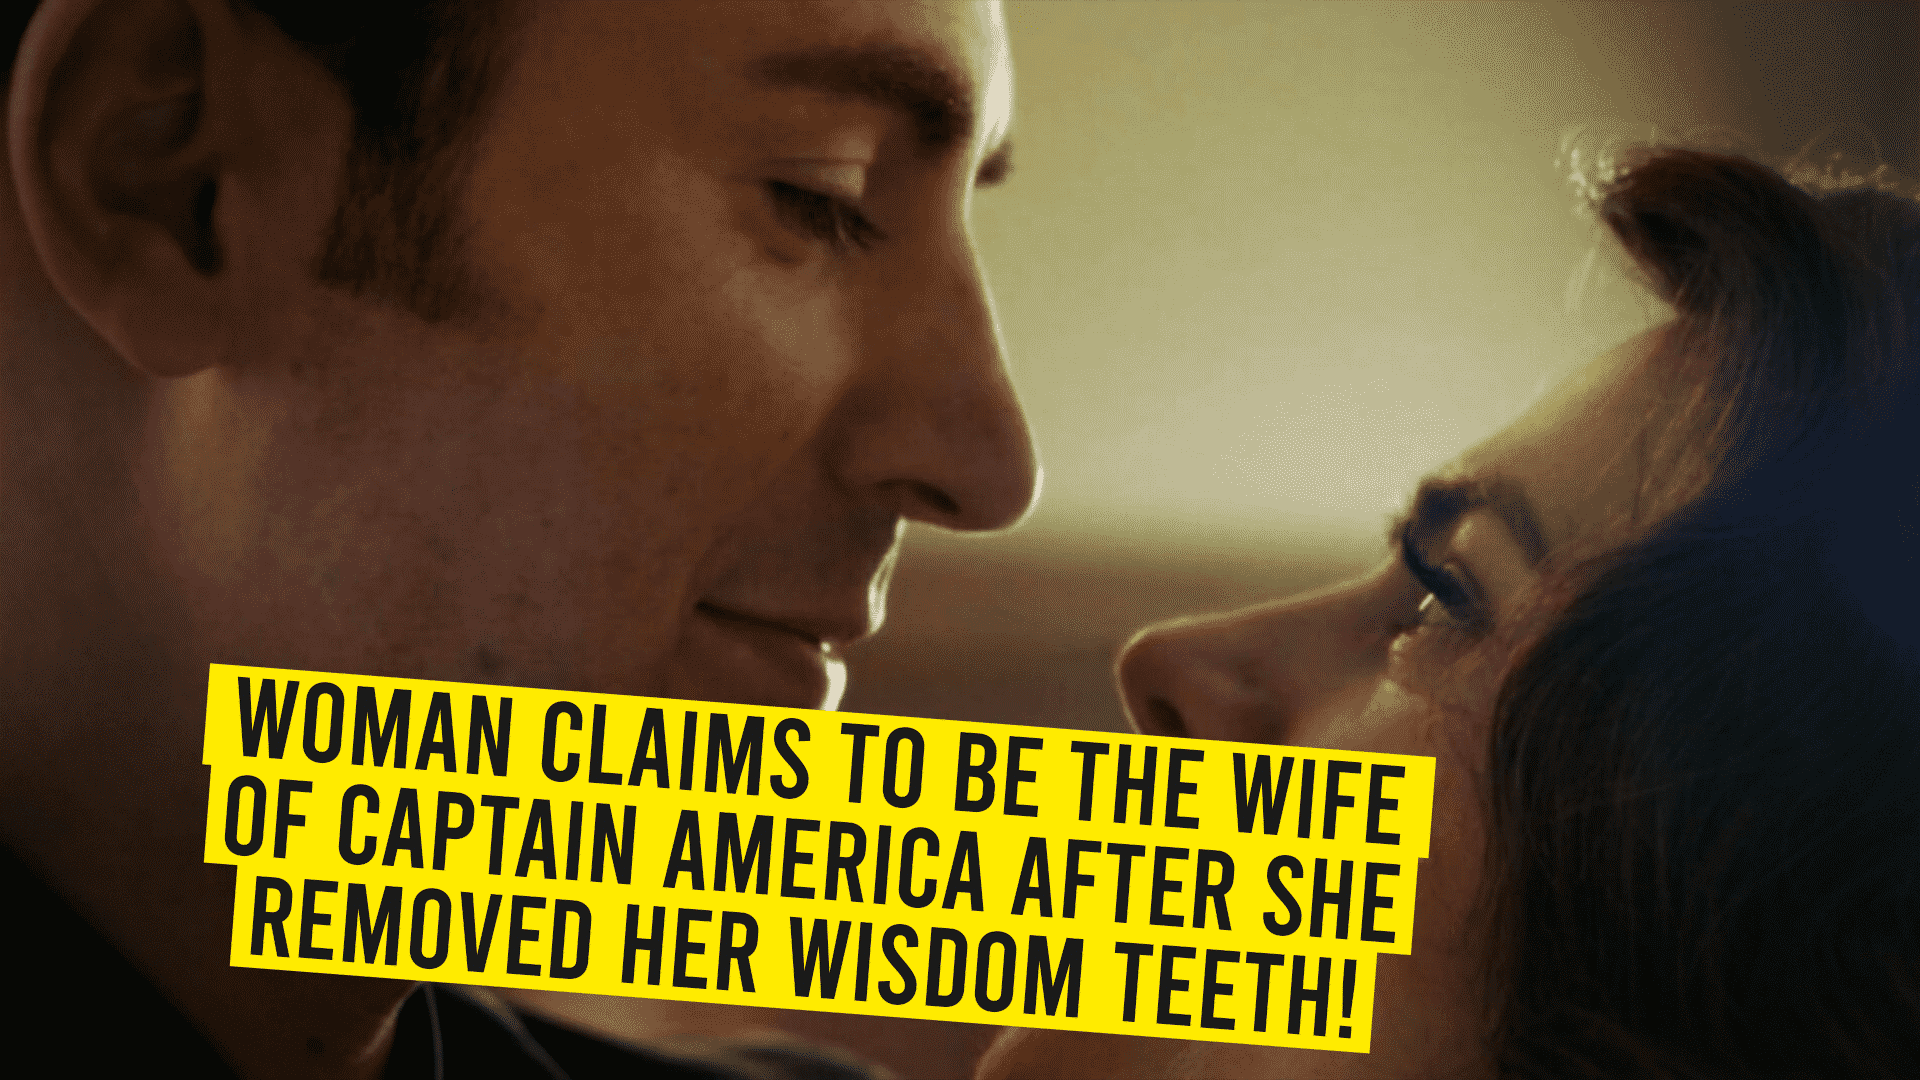 Woman claims to be the wife of Captain America after she removed her wisdom teeth!